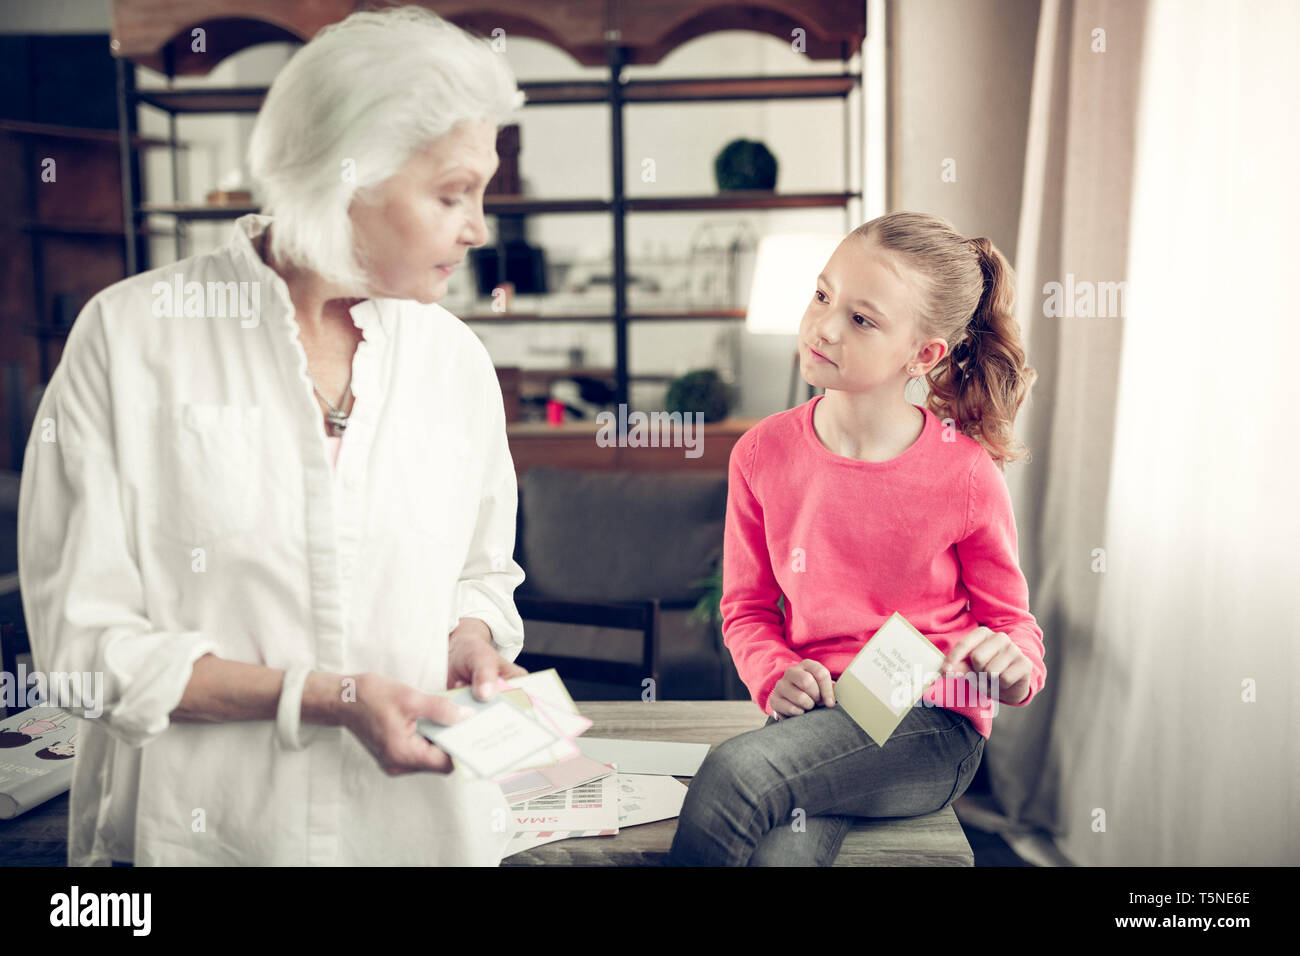 Girl answering the question on flashcard while playing with granny Stock Photo